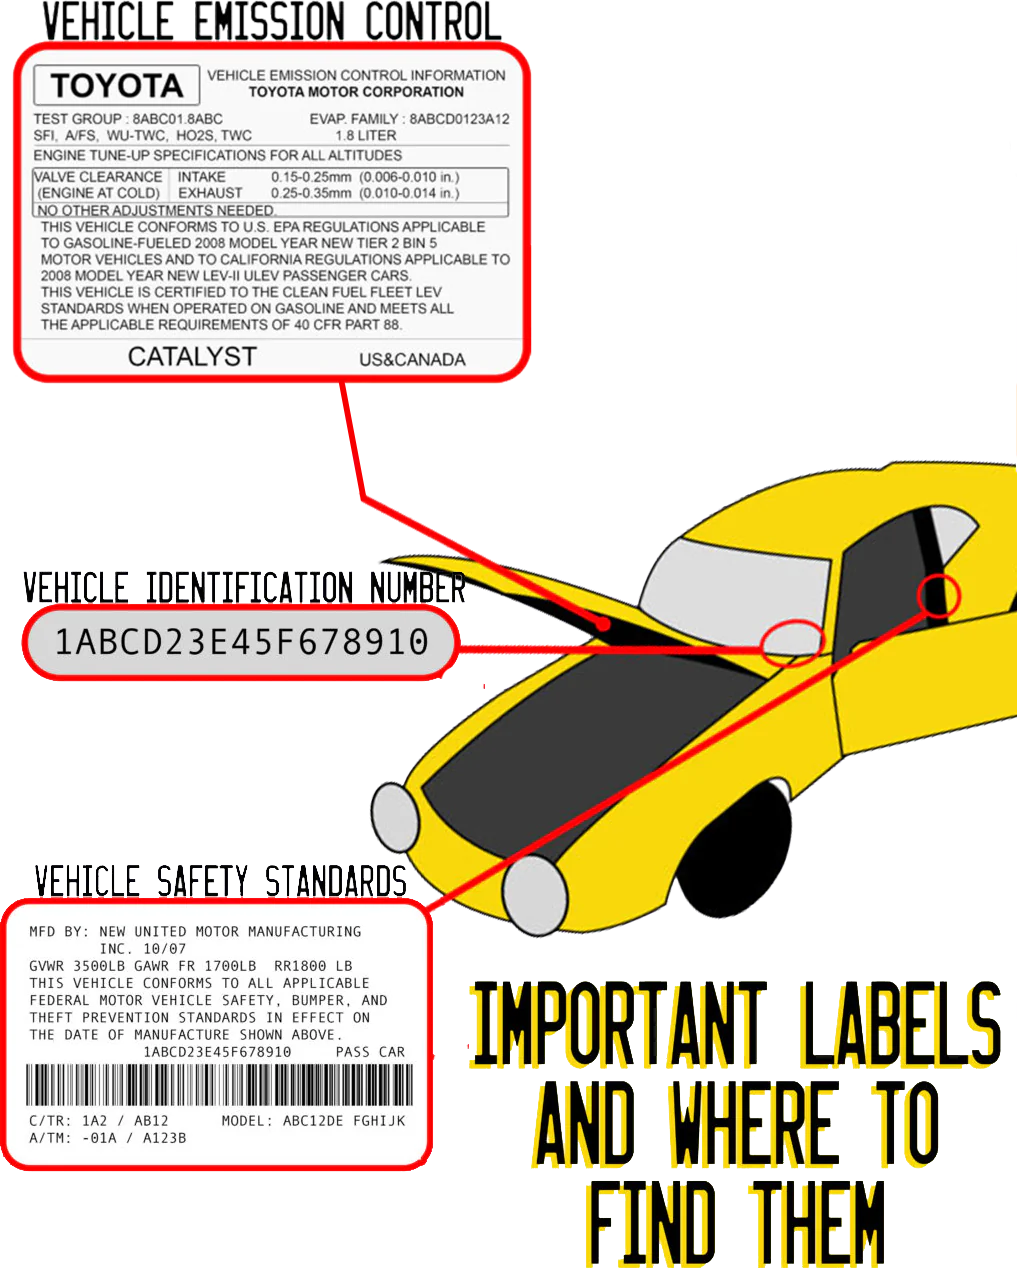 Important Labels and where to find them